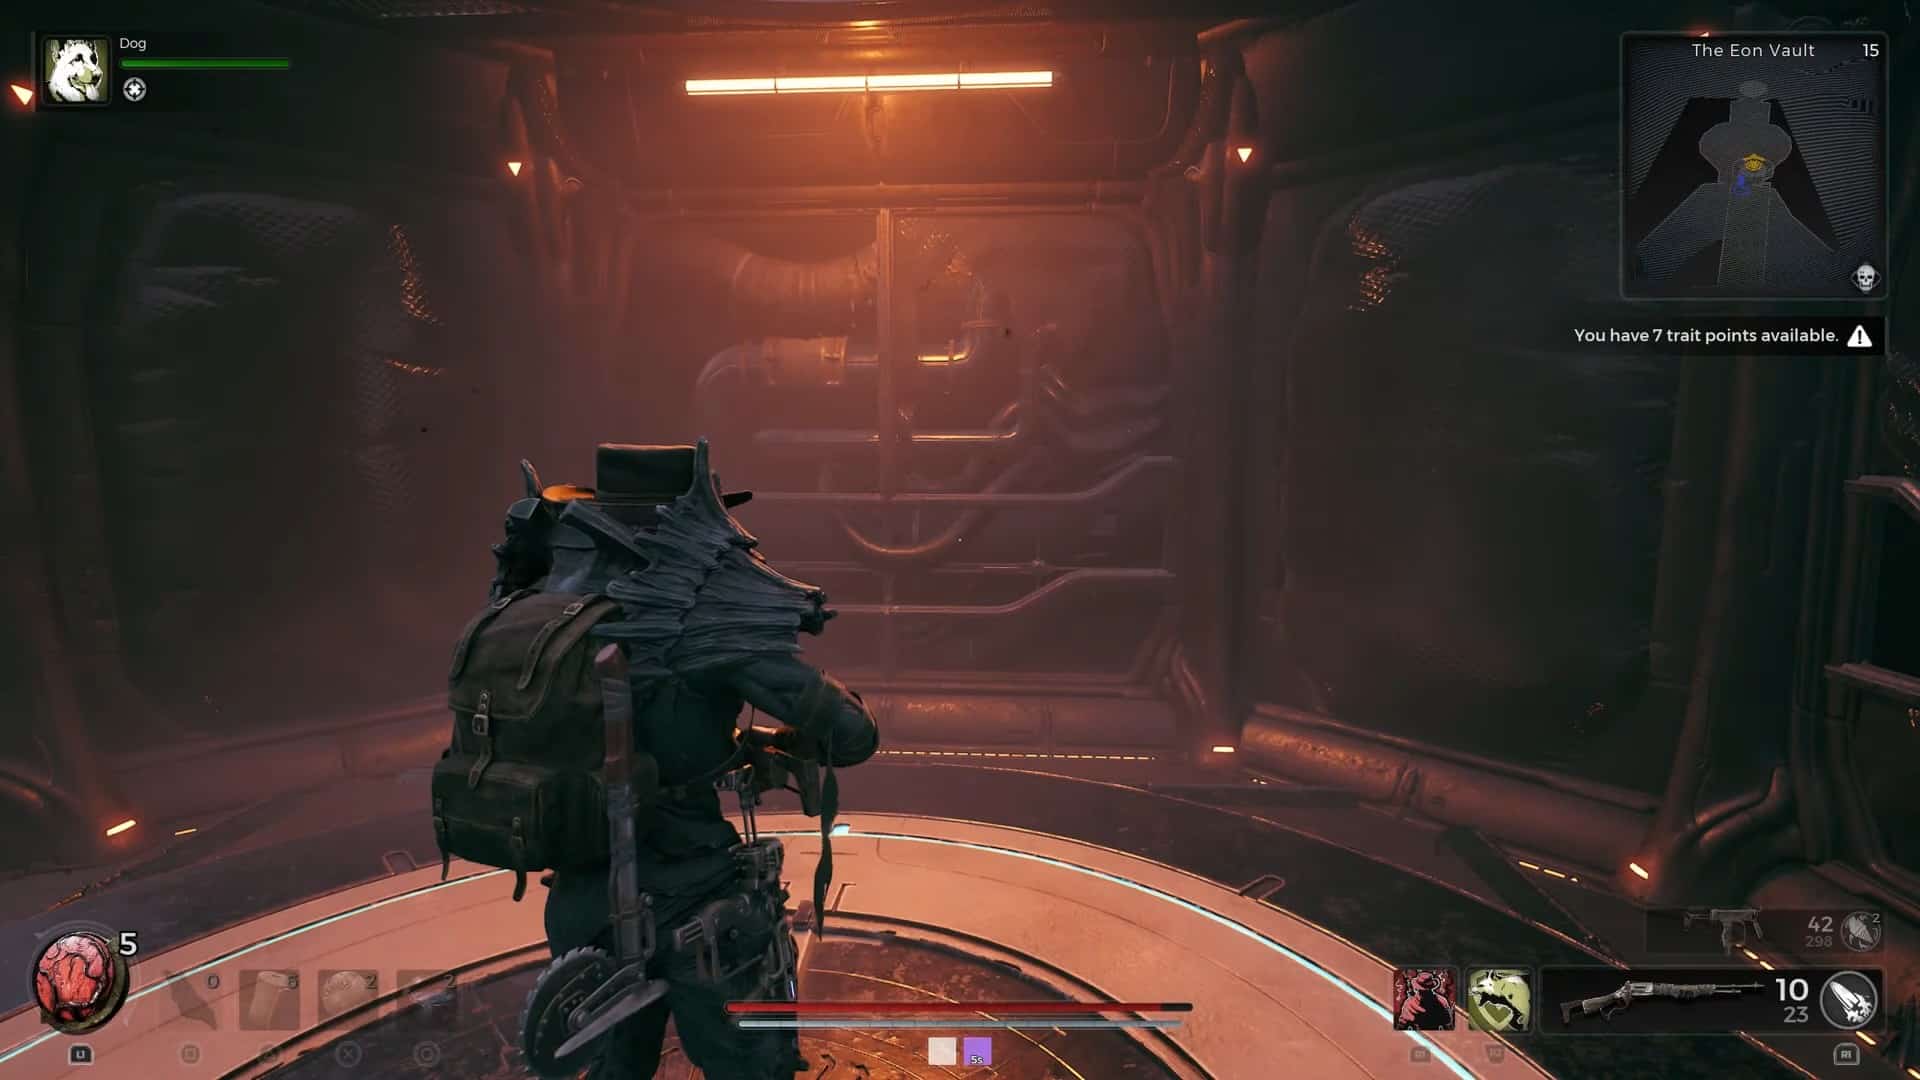 How To Get To The Eon Vault In Remnant 2